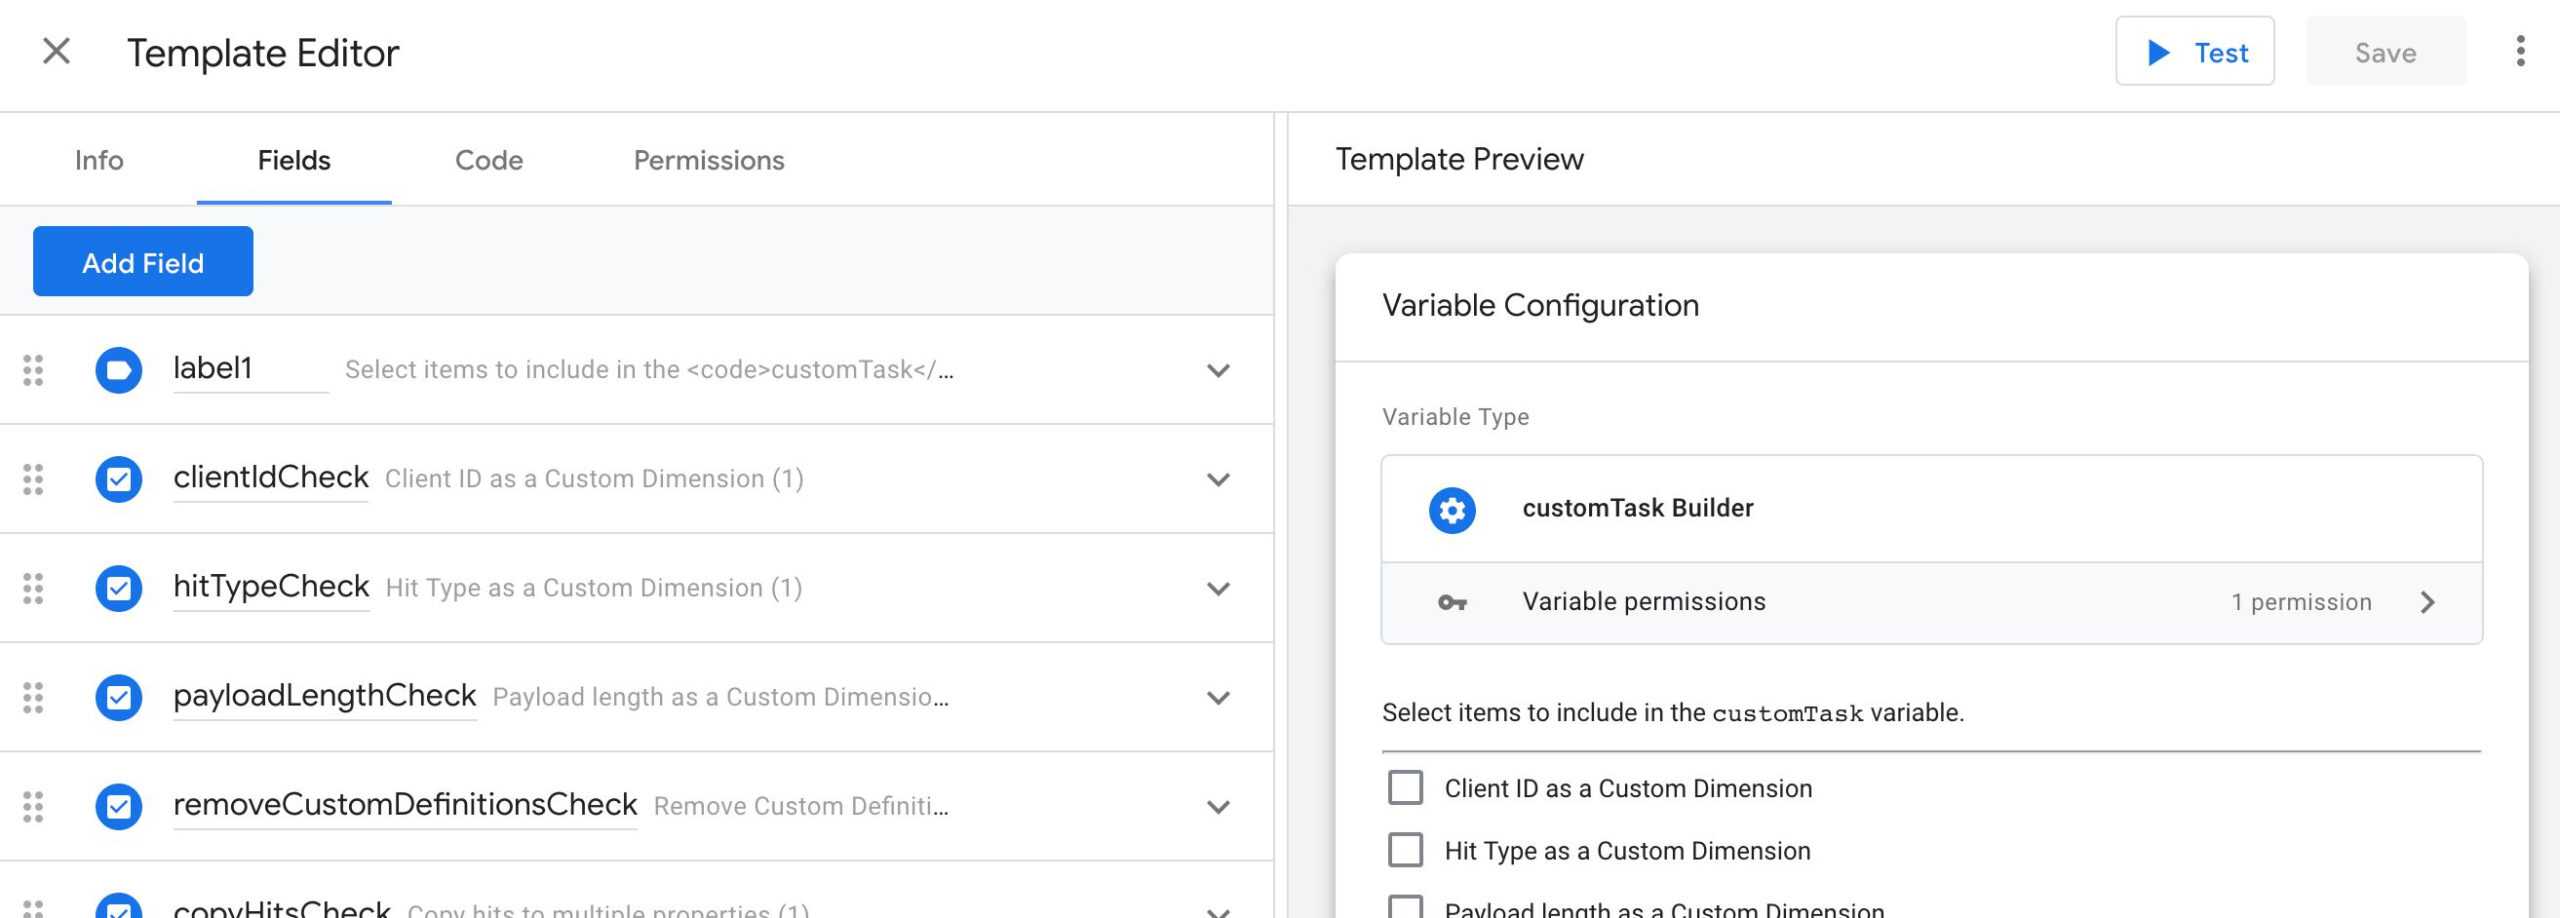 Custom Templates Guide For Google Tag Manager | Simo Ahava's In Words Their Way Blank Sort Template